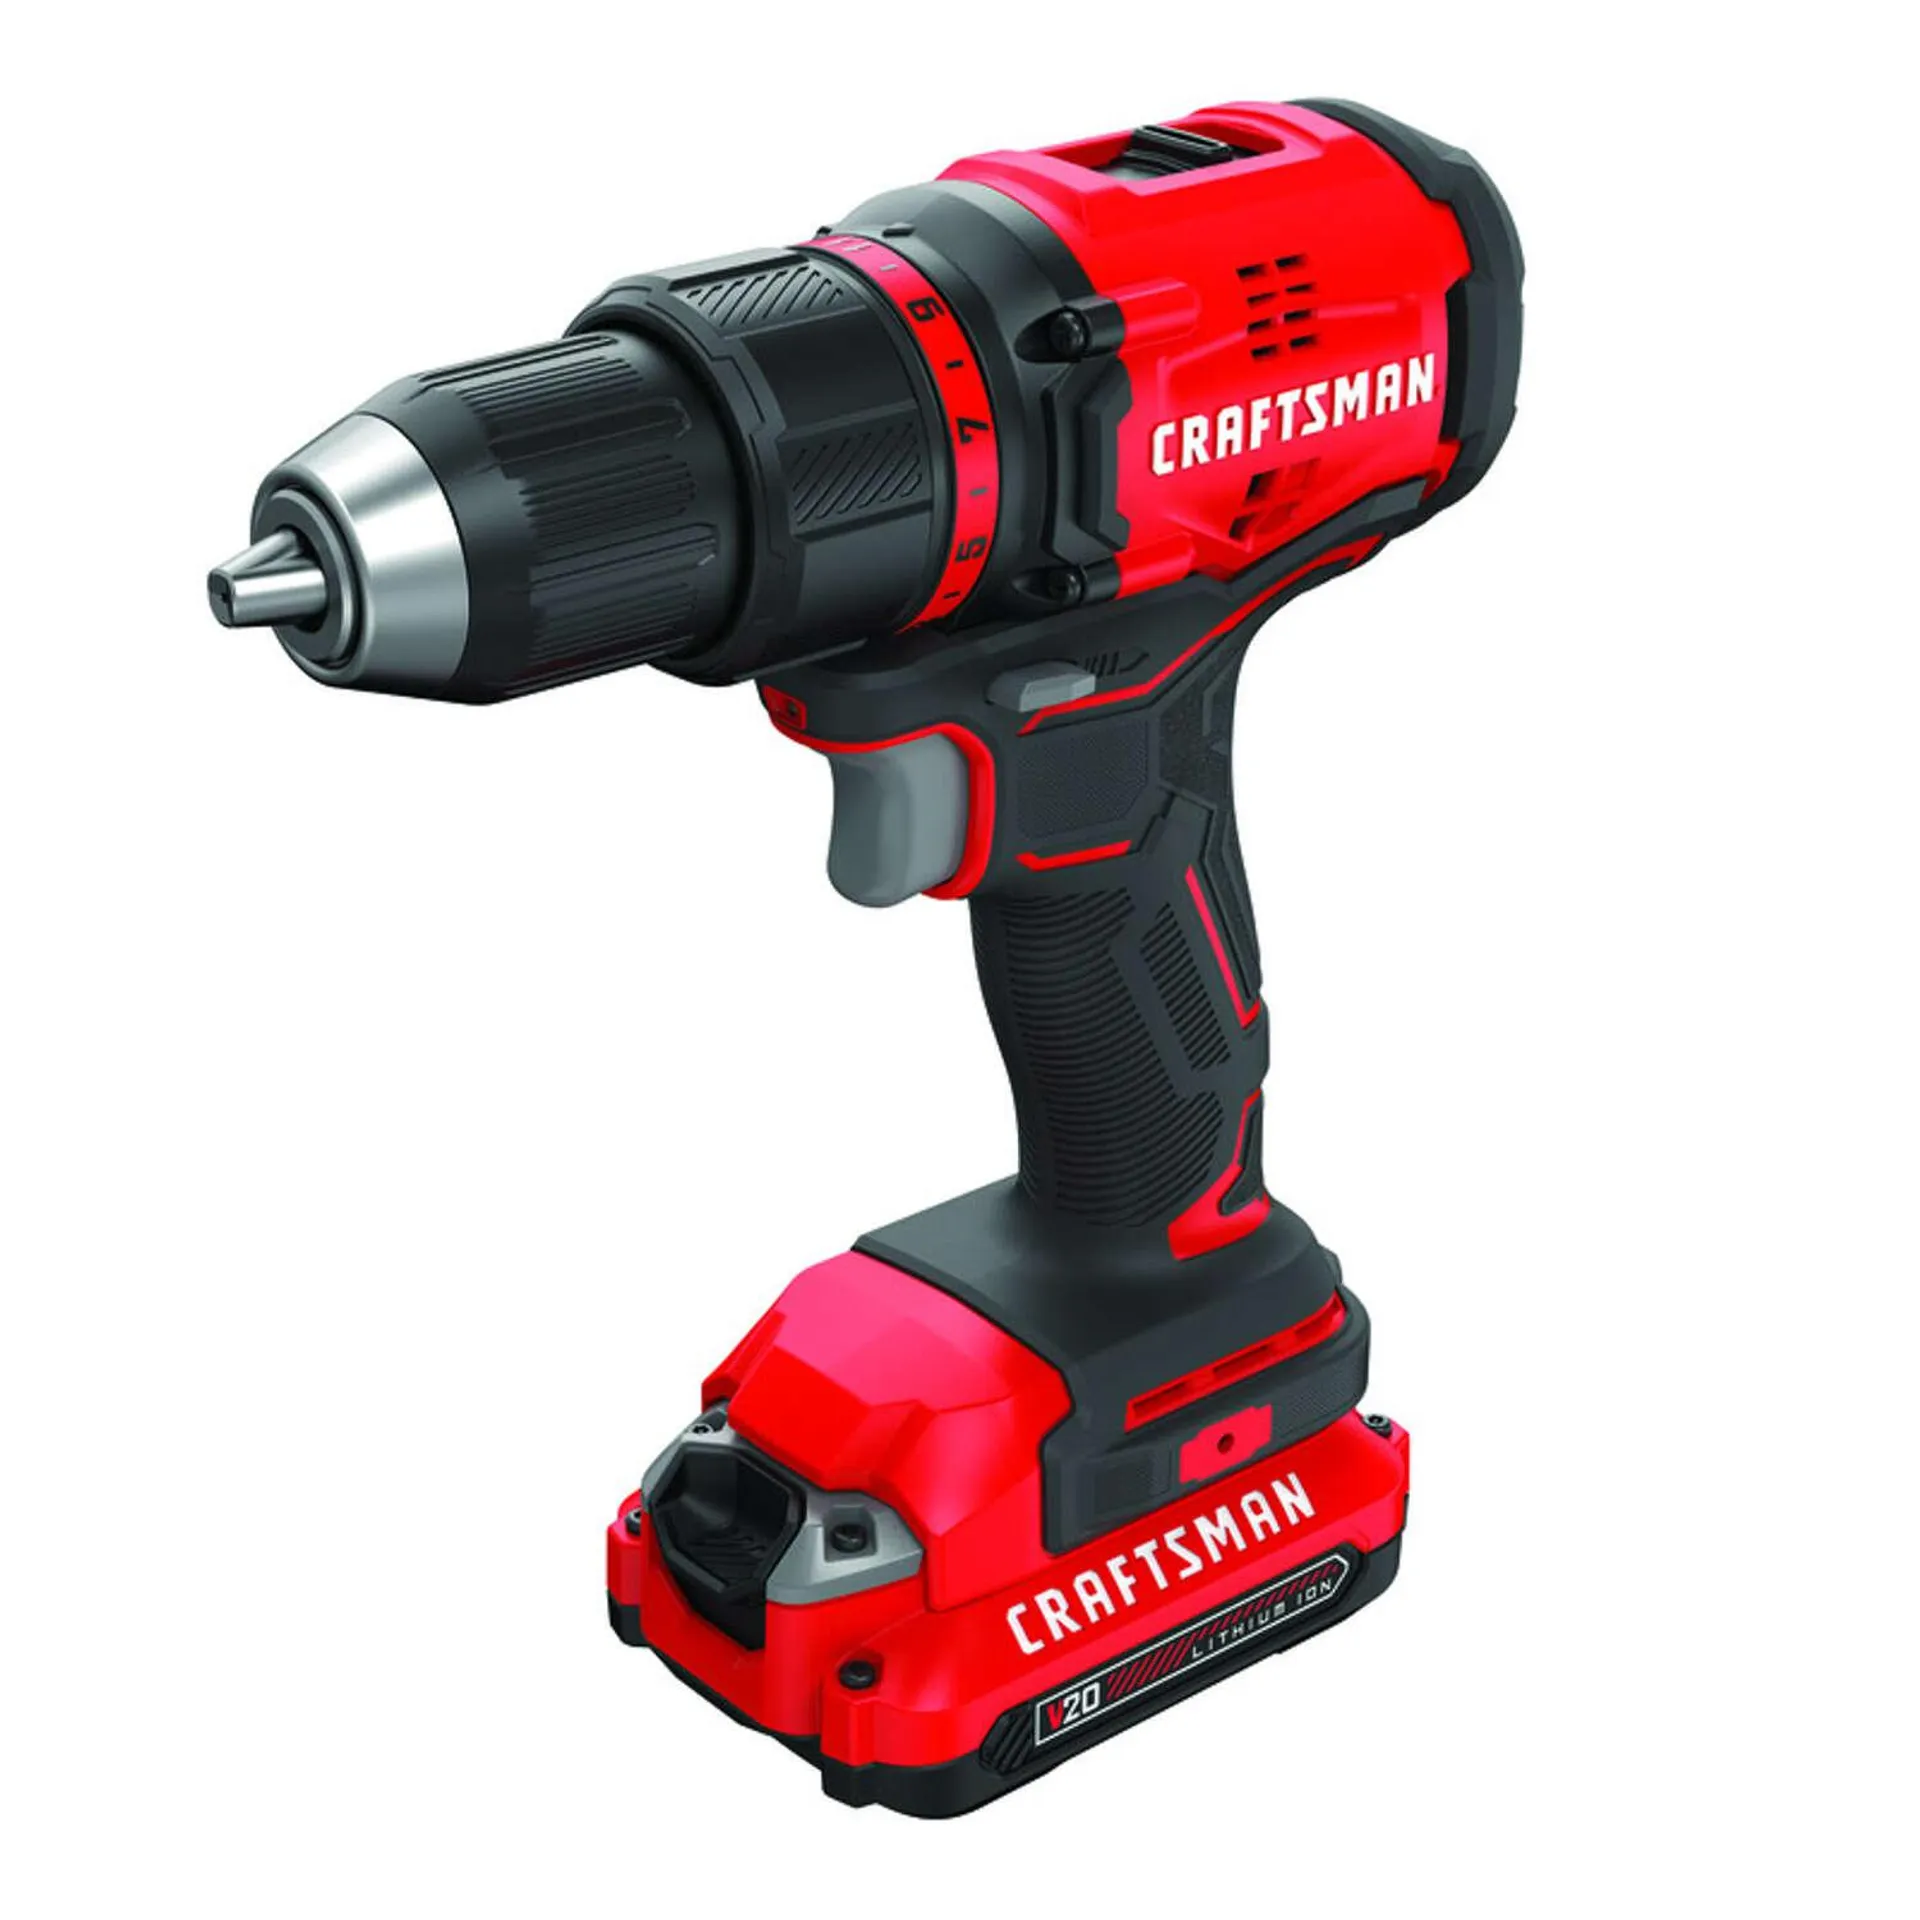 Craftsman V20 20 V 1/2 in. Brushless Cordless Compact Drill Kit (Battery & Charger)